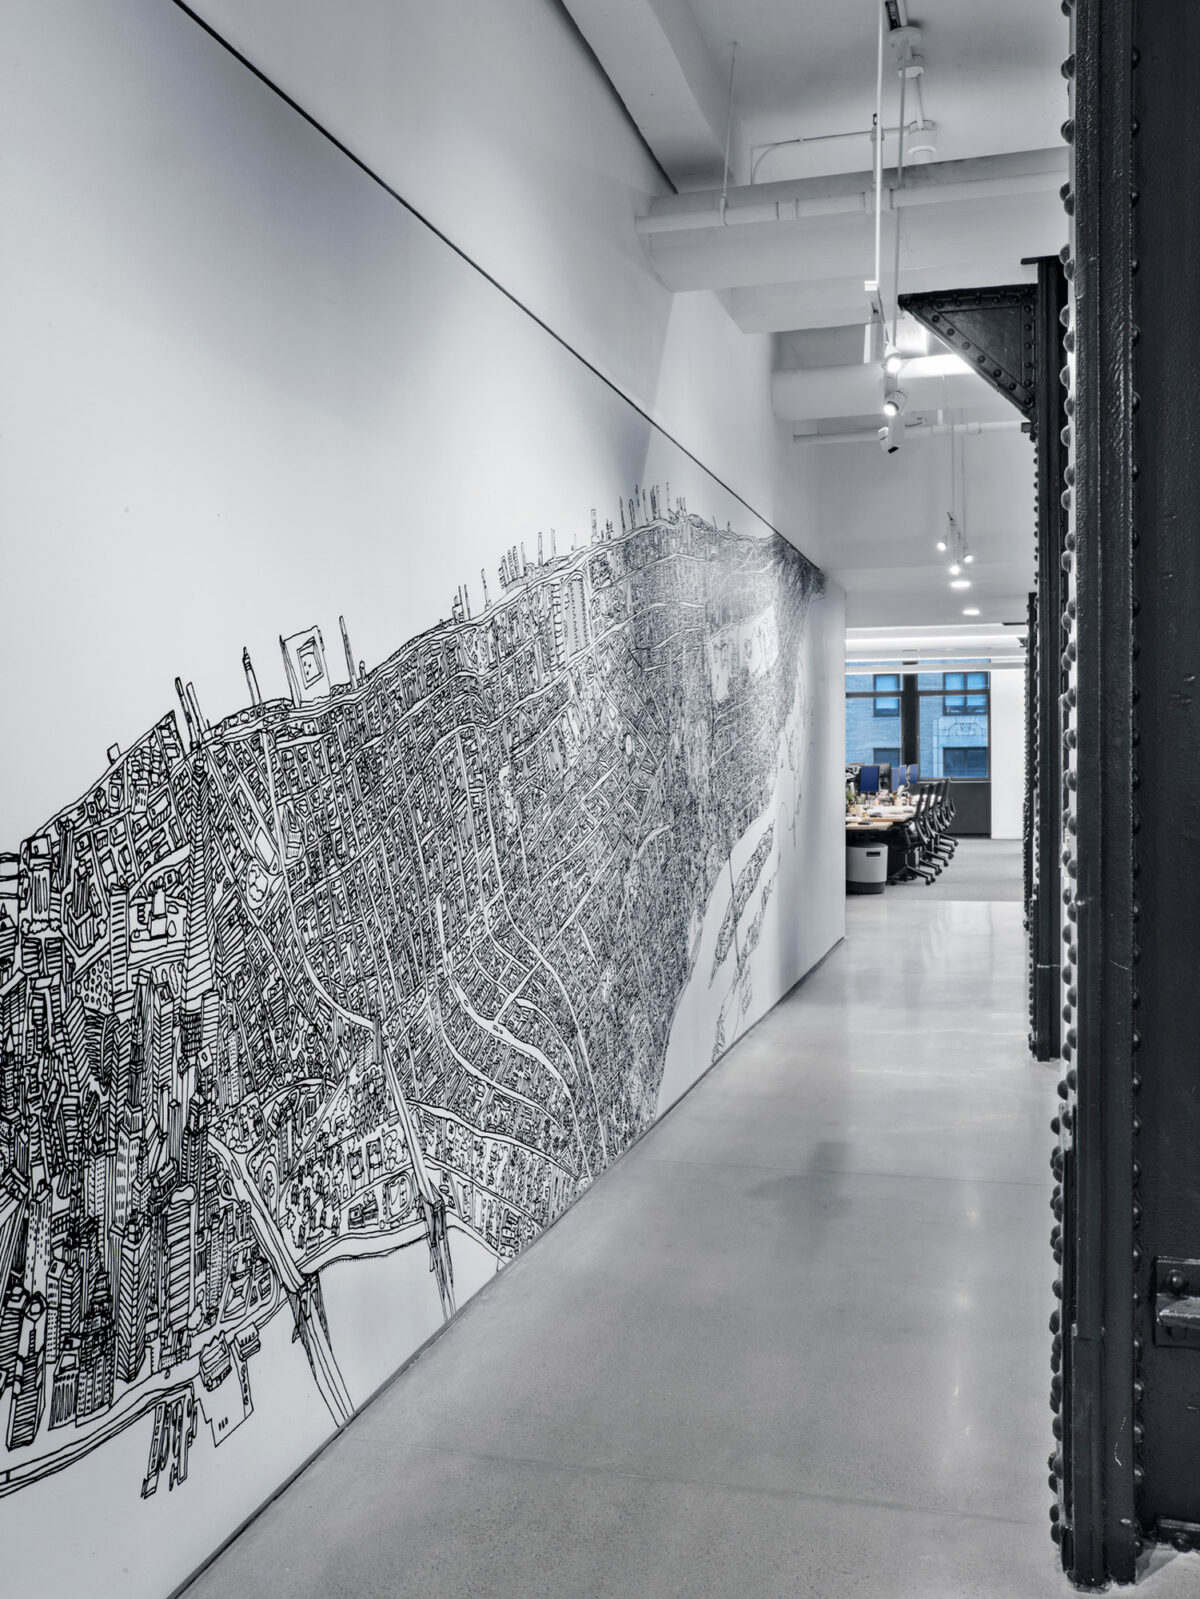 A large, detailed wall mural depicting an intricate cityscape, enhancing the length of a well-lit corridor, leading to a bright office space with seating areas visible in the distance, showcasing an integration of art within a working environment.